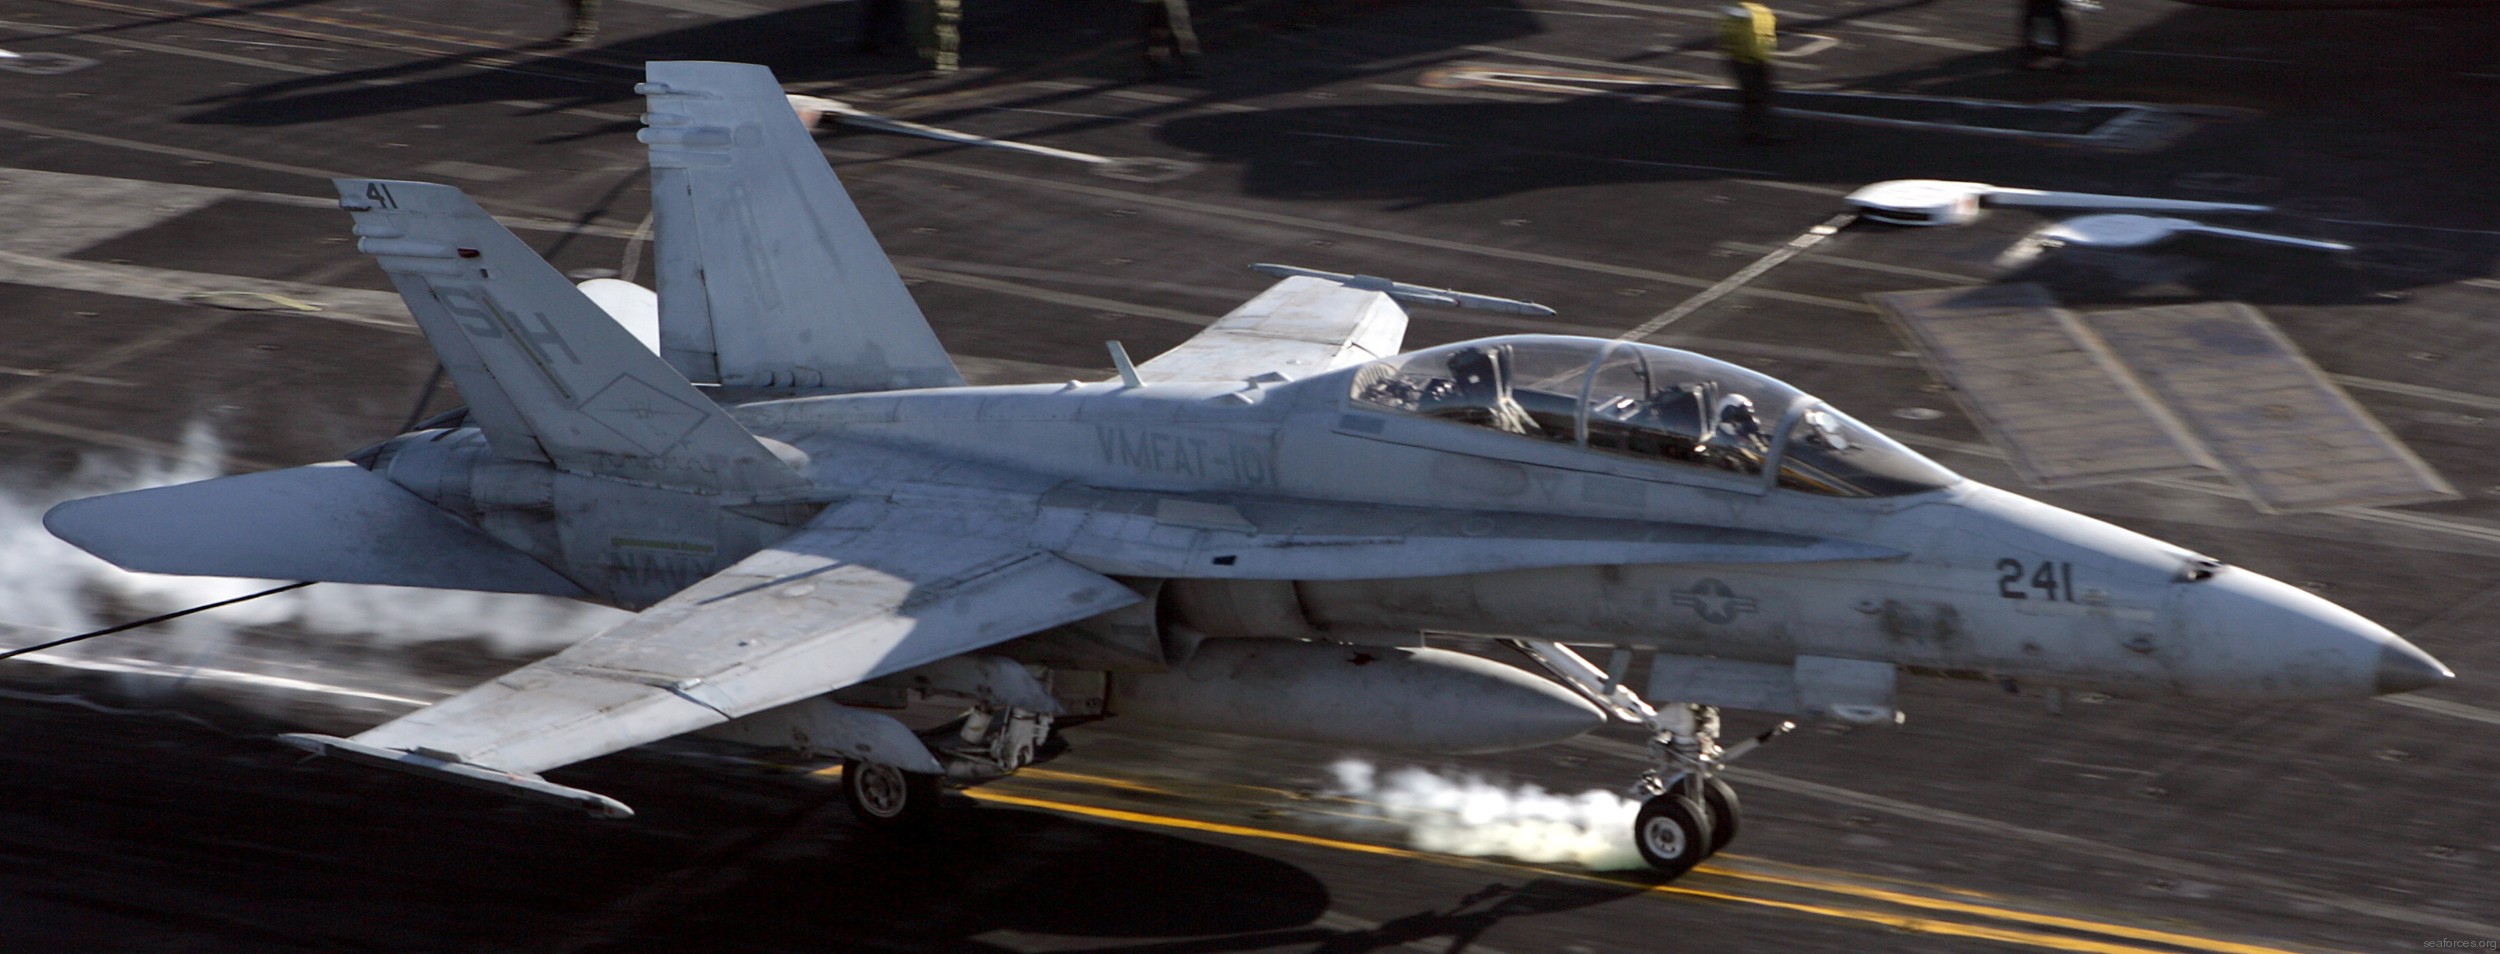 vmfat-101 sharpshooters marine fighter attack training squadron f/a-18d hornet 31